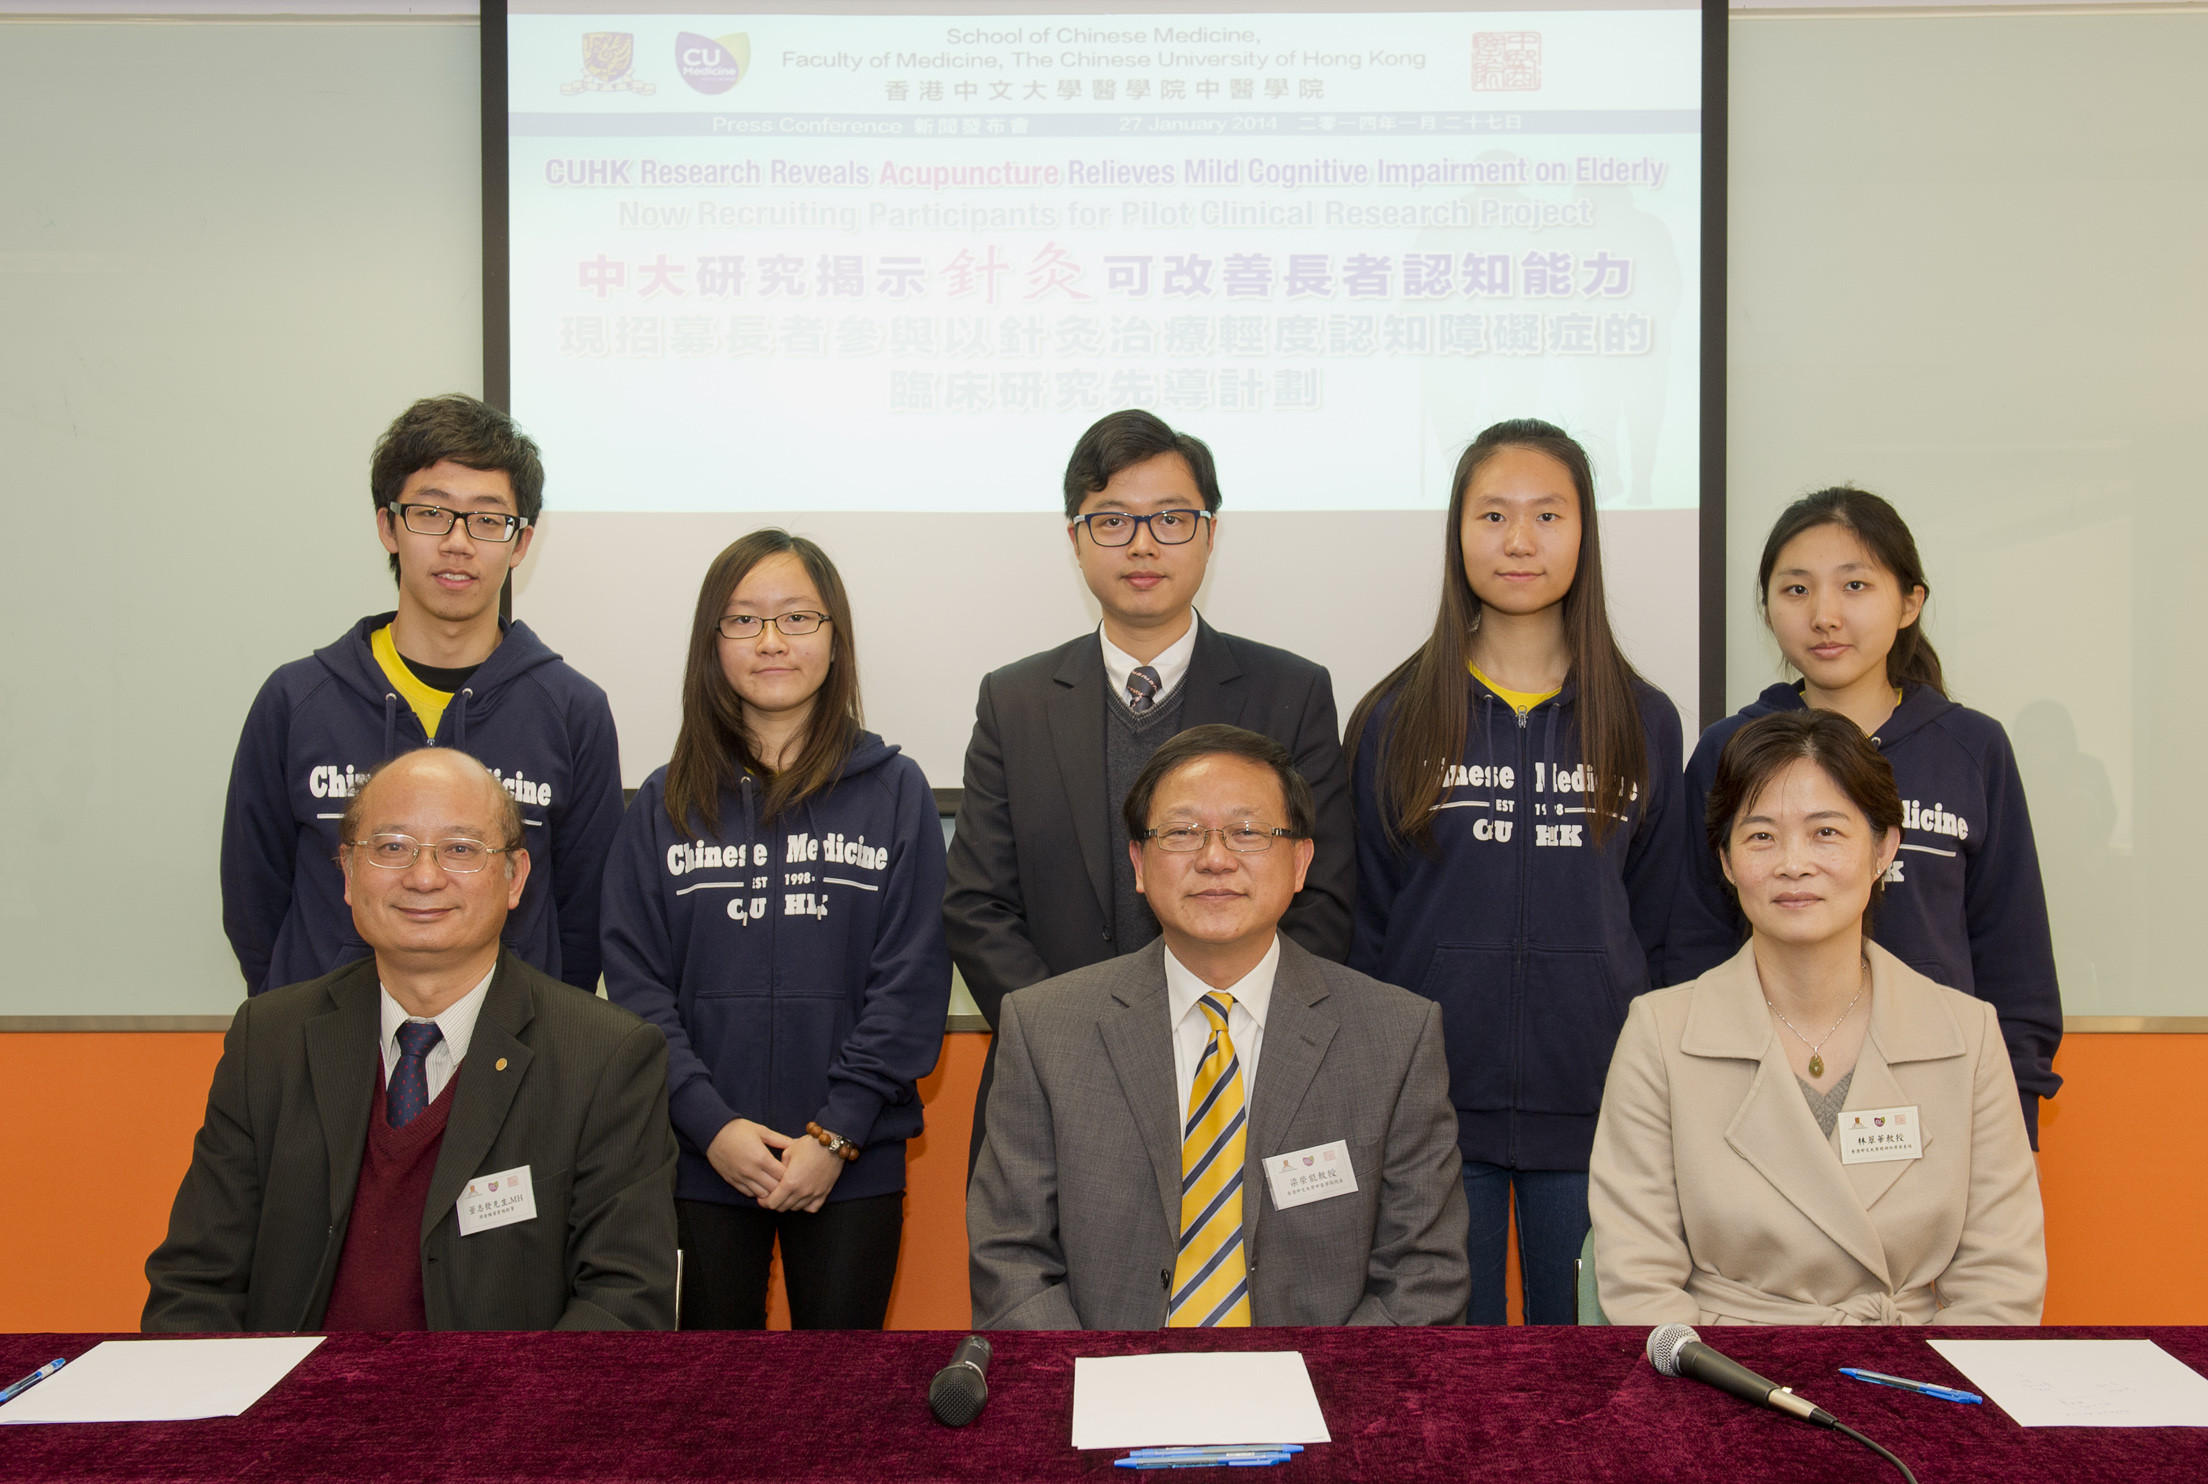 A group photo of the speakers and students from the School of Chinese Medicine, CUHK.